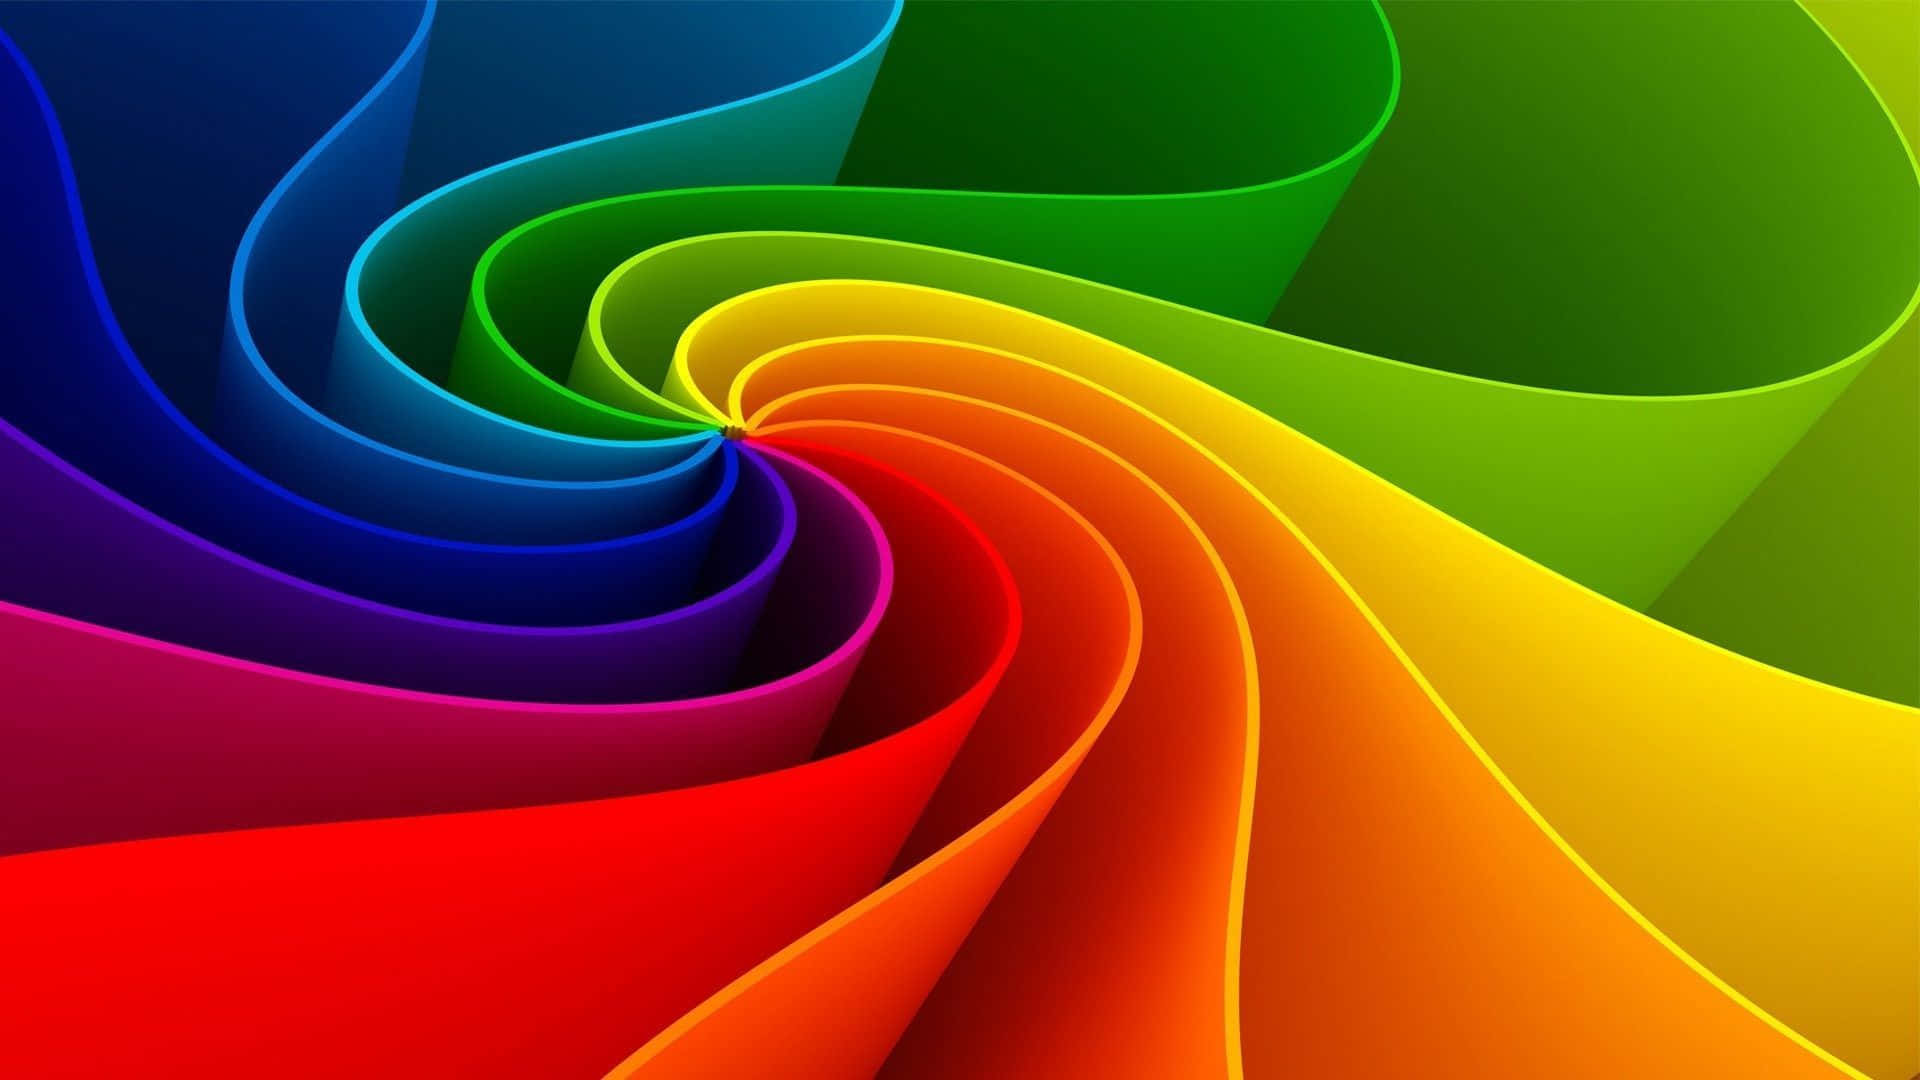 A Colorful Spiral Paper Background